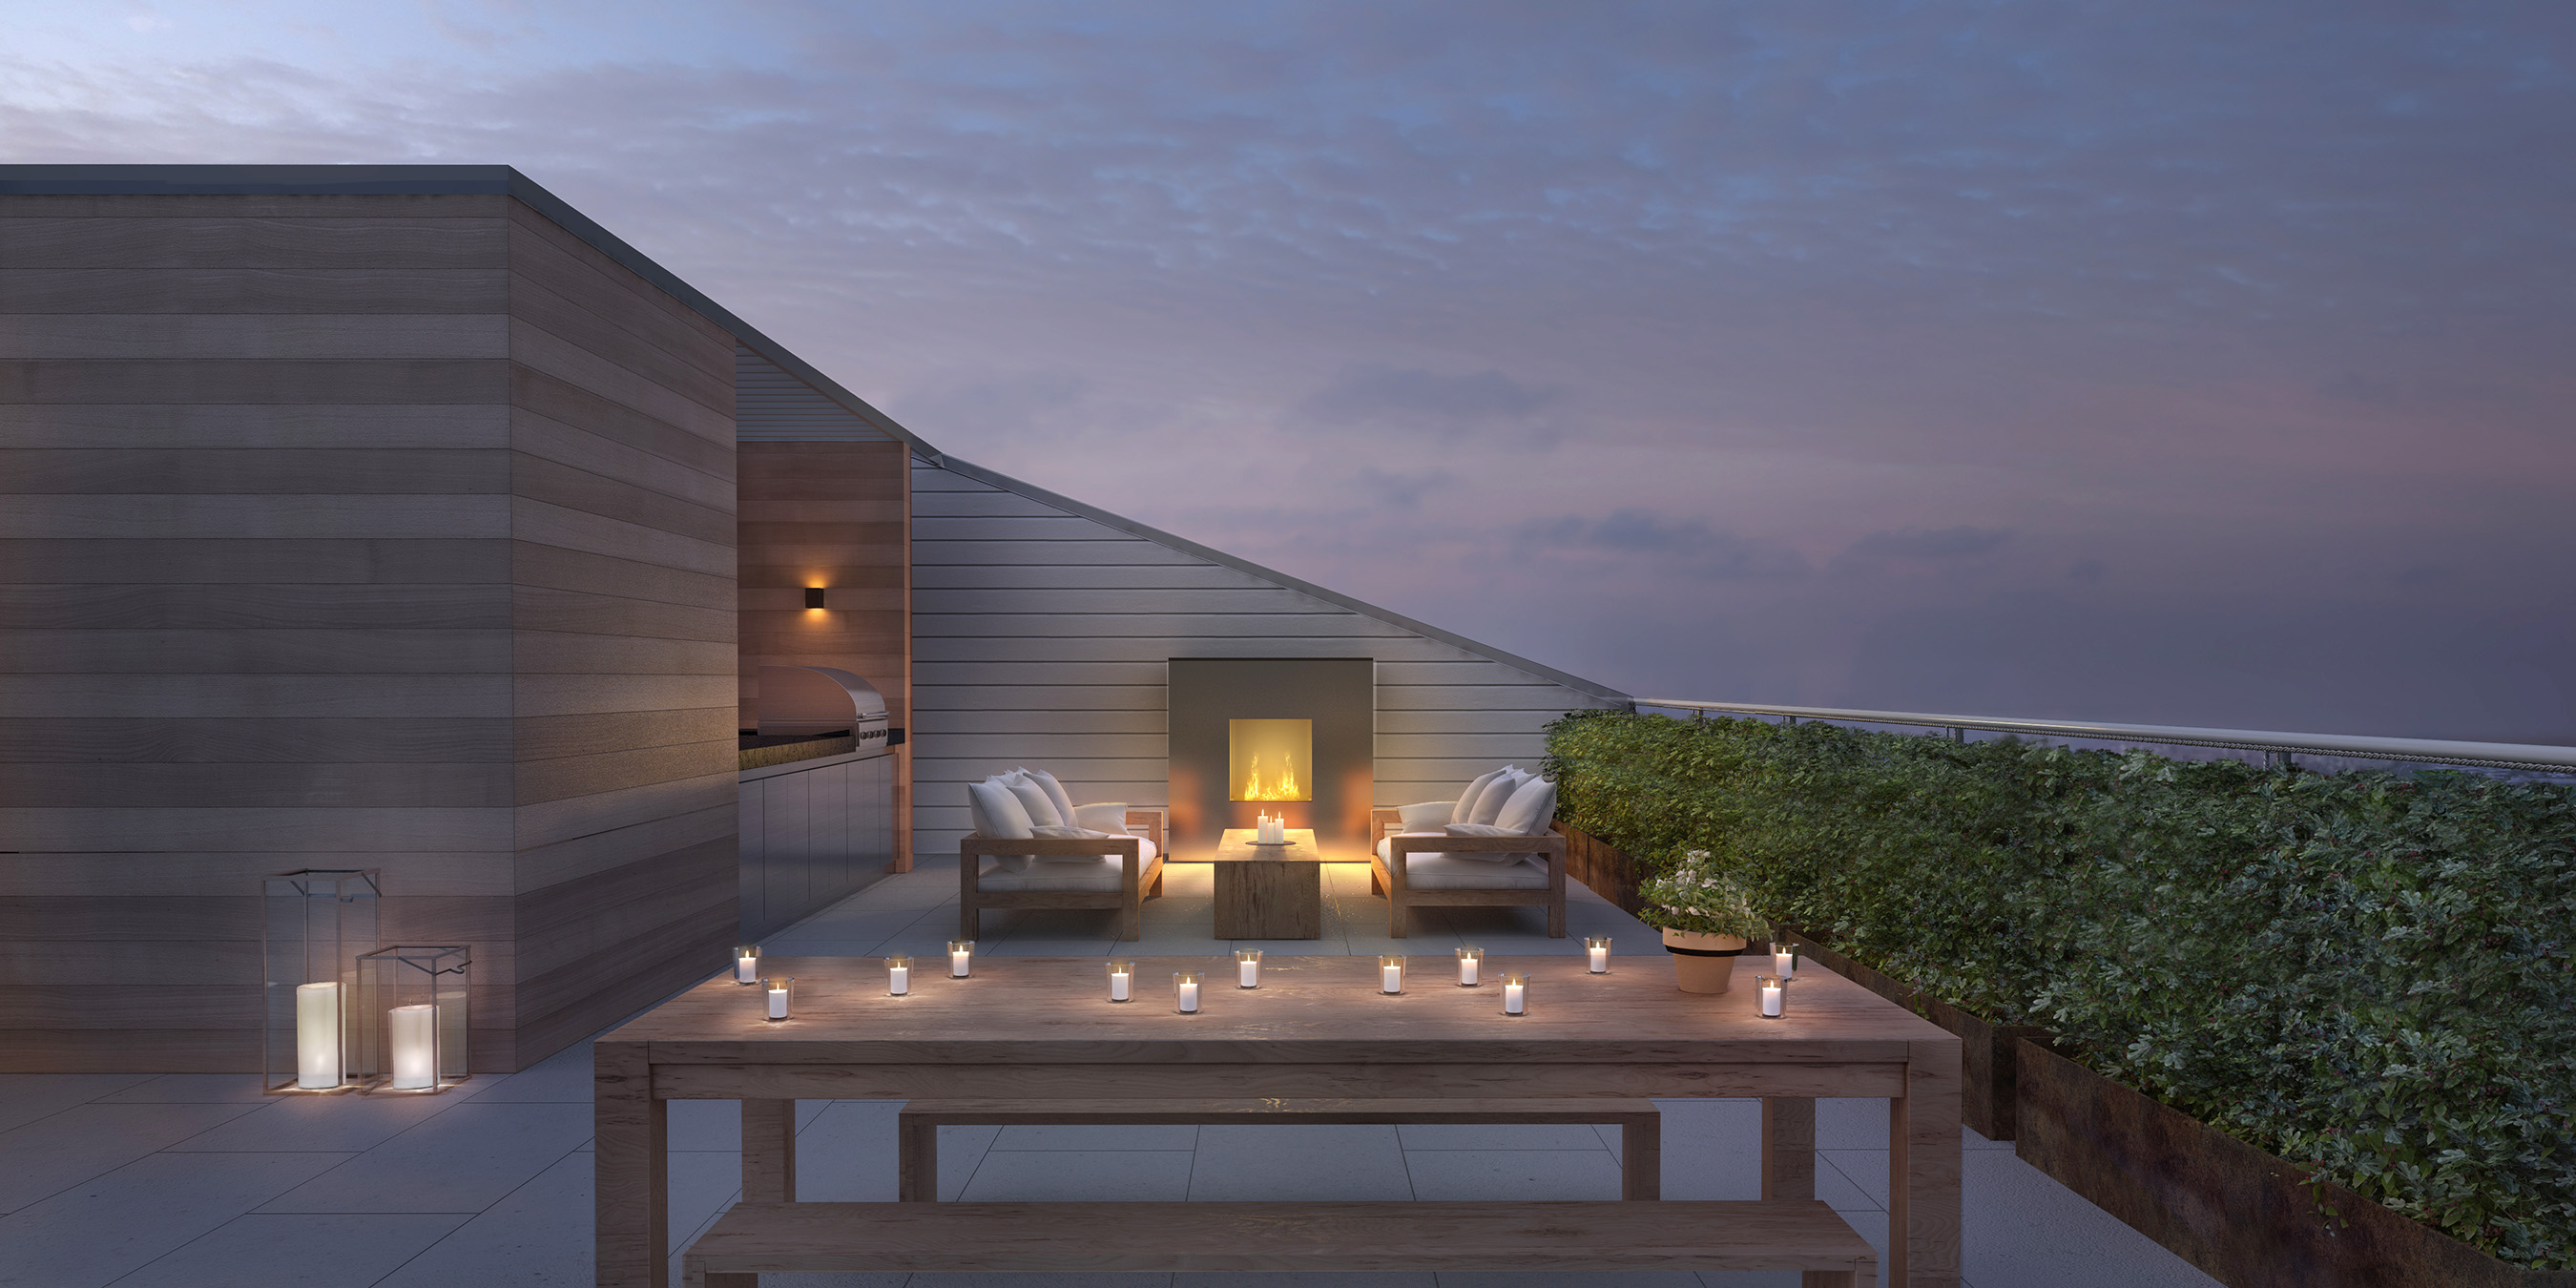 The private terrace, replete with a Raw Urth Designs Napa fireplace and KitchenAid grill, is the ultimate place to host a barbeque and enjoy summer weather on the Jersey Shore.